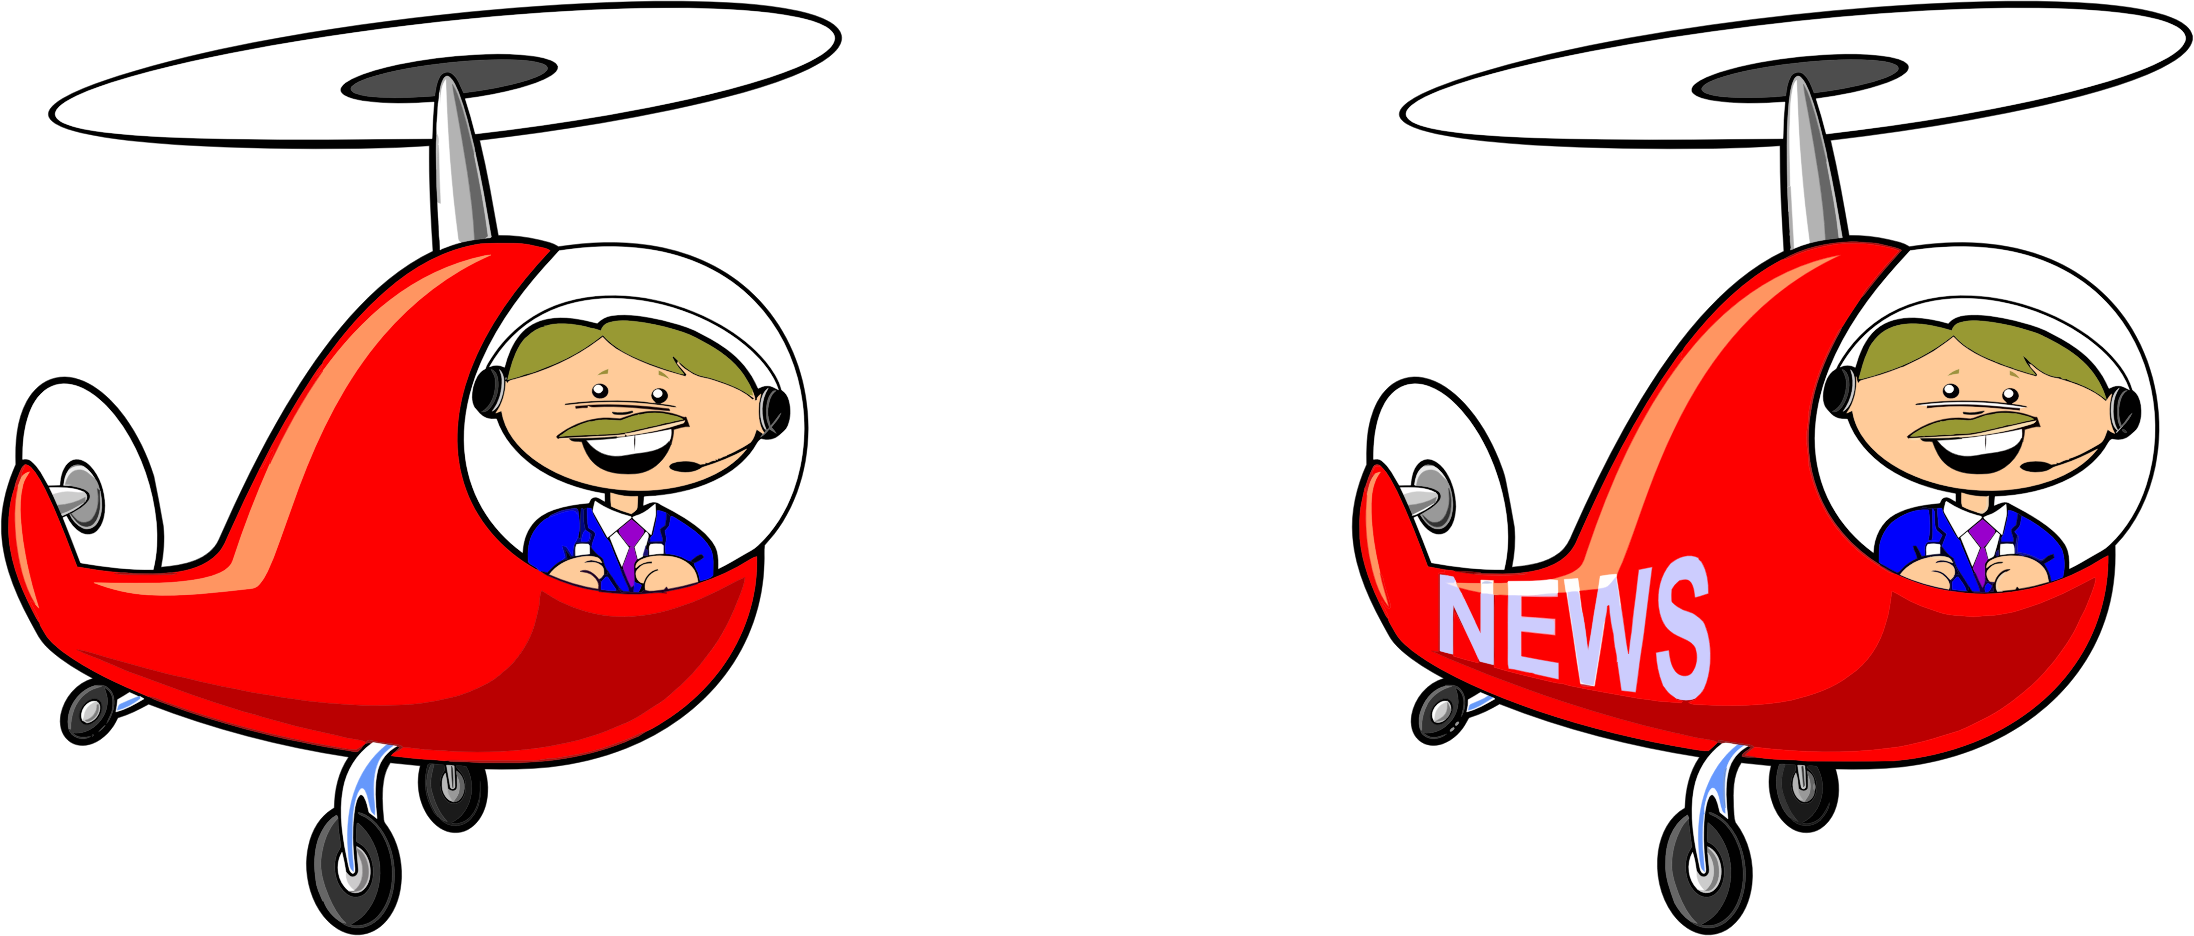 free clipart cartoon helicopter - photo #38